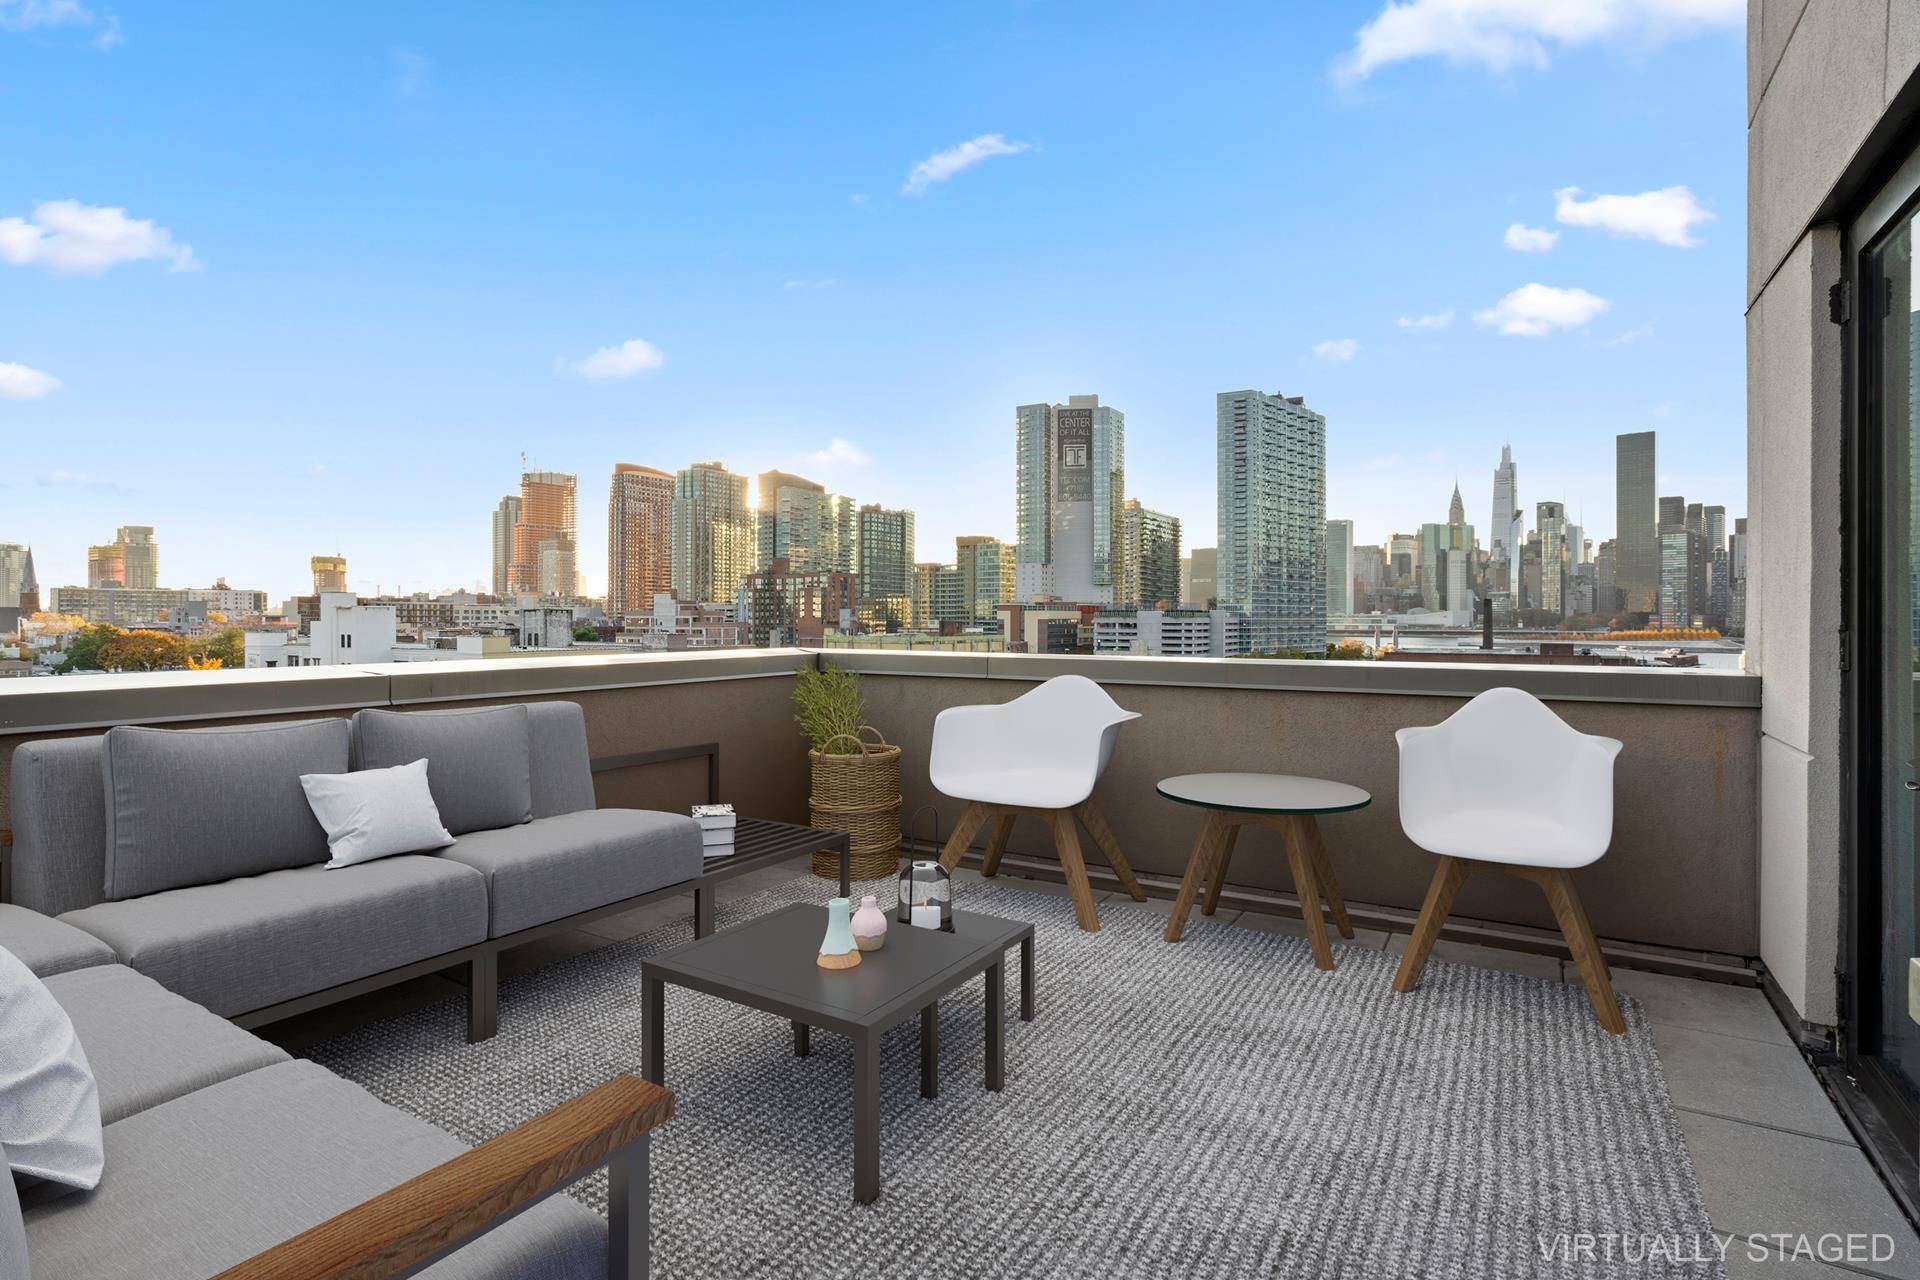 2 MONTHS FREE ON A 12 MONTH LEASE GROSS RENT 3, 449 Month Located in Hunters Point, this oversized 1 bedroom residence features an expansive private outdoor terrace, an open ...